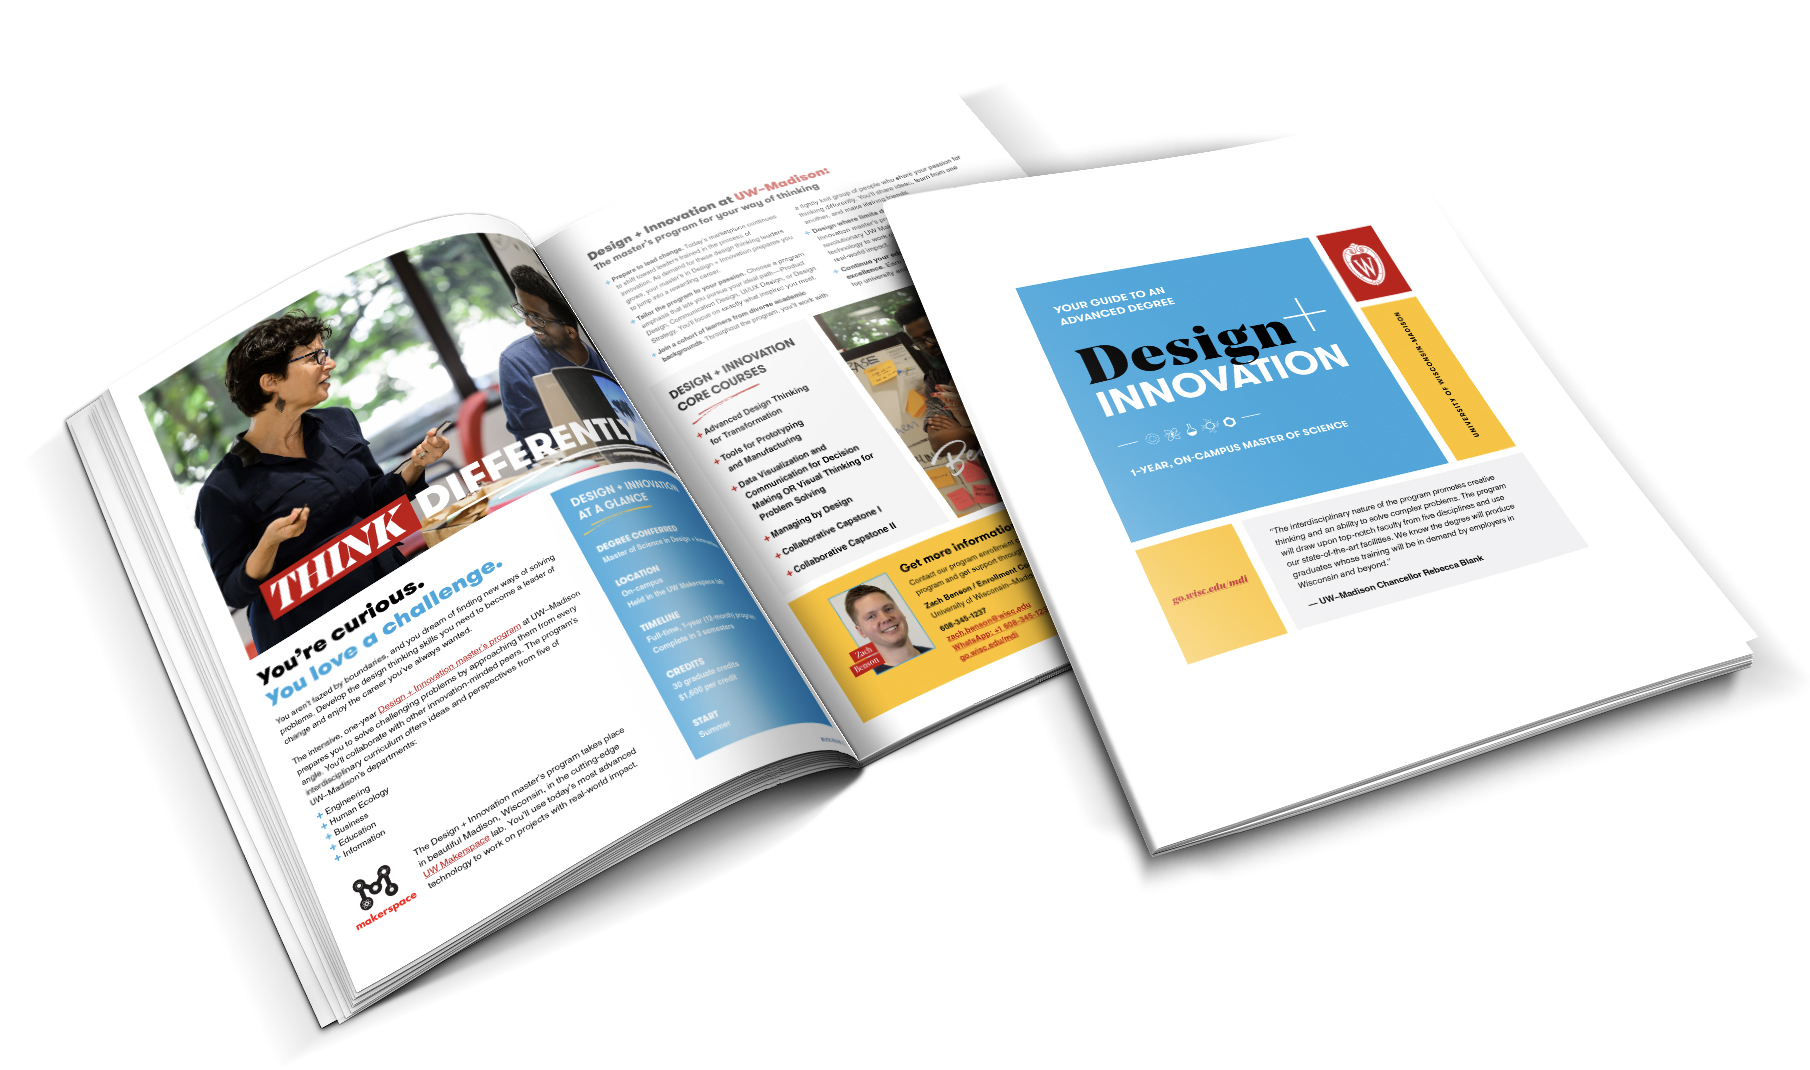 Program guide created by Vendi Advertising for the University of Wisconsin¬–Madison Design and Innovation program